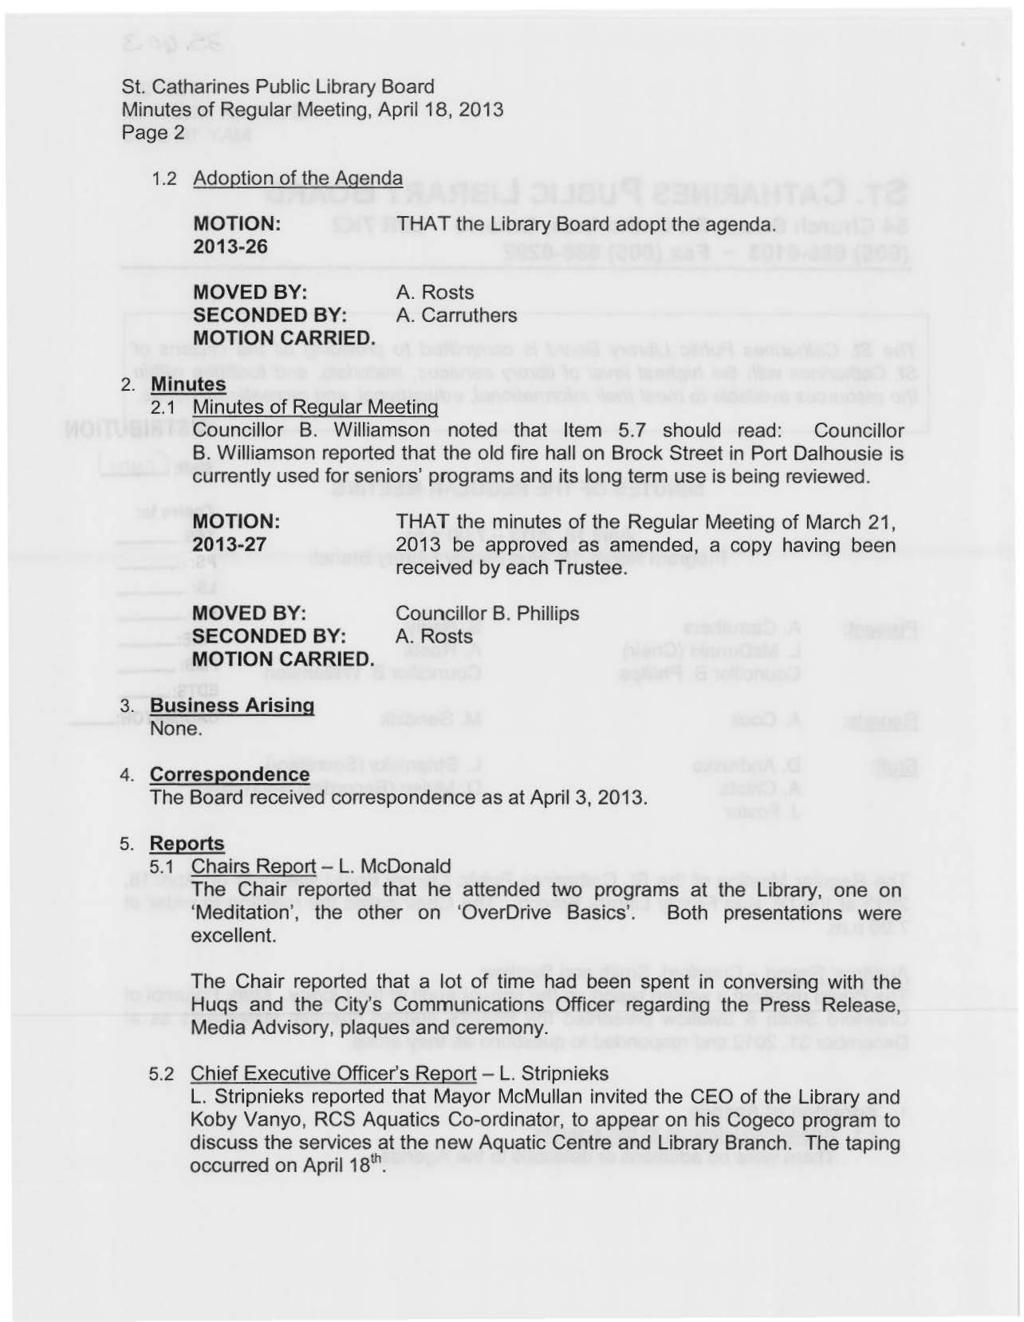 Page 2 1.2 Adoption of the Agenda 2013-26 THAT the Library Board adopt the agenda. 2. Minutes 2.1 Minutes of Regular Meeting noted that Item 5.7 should read : Councillor B.